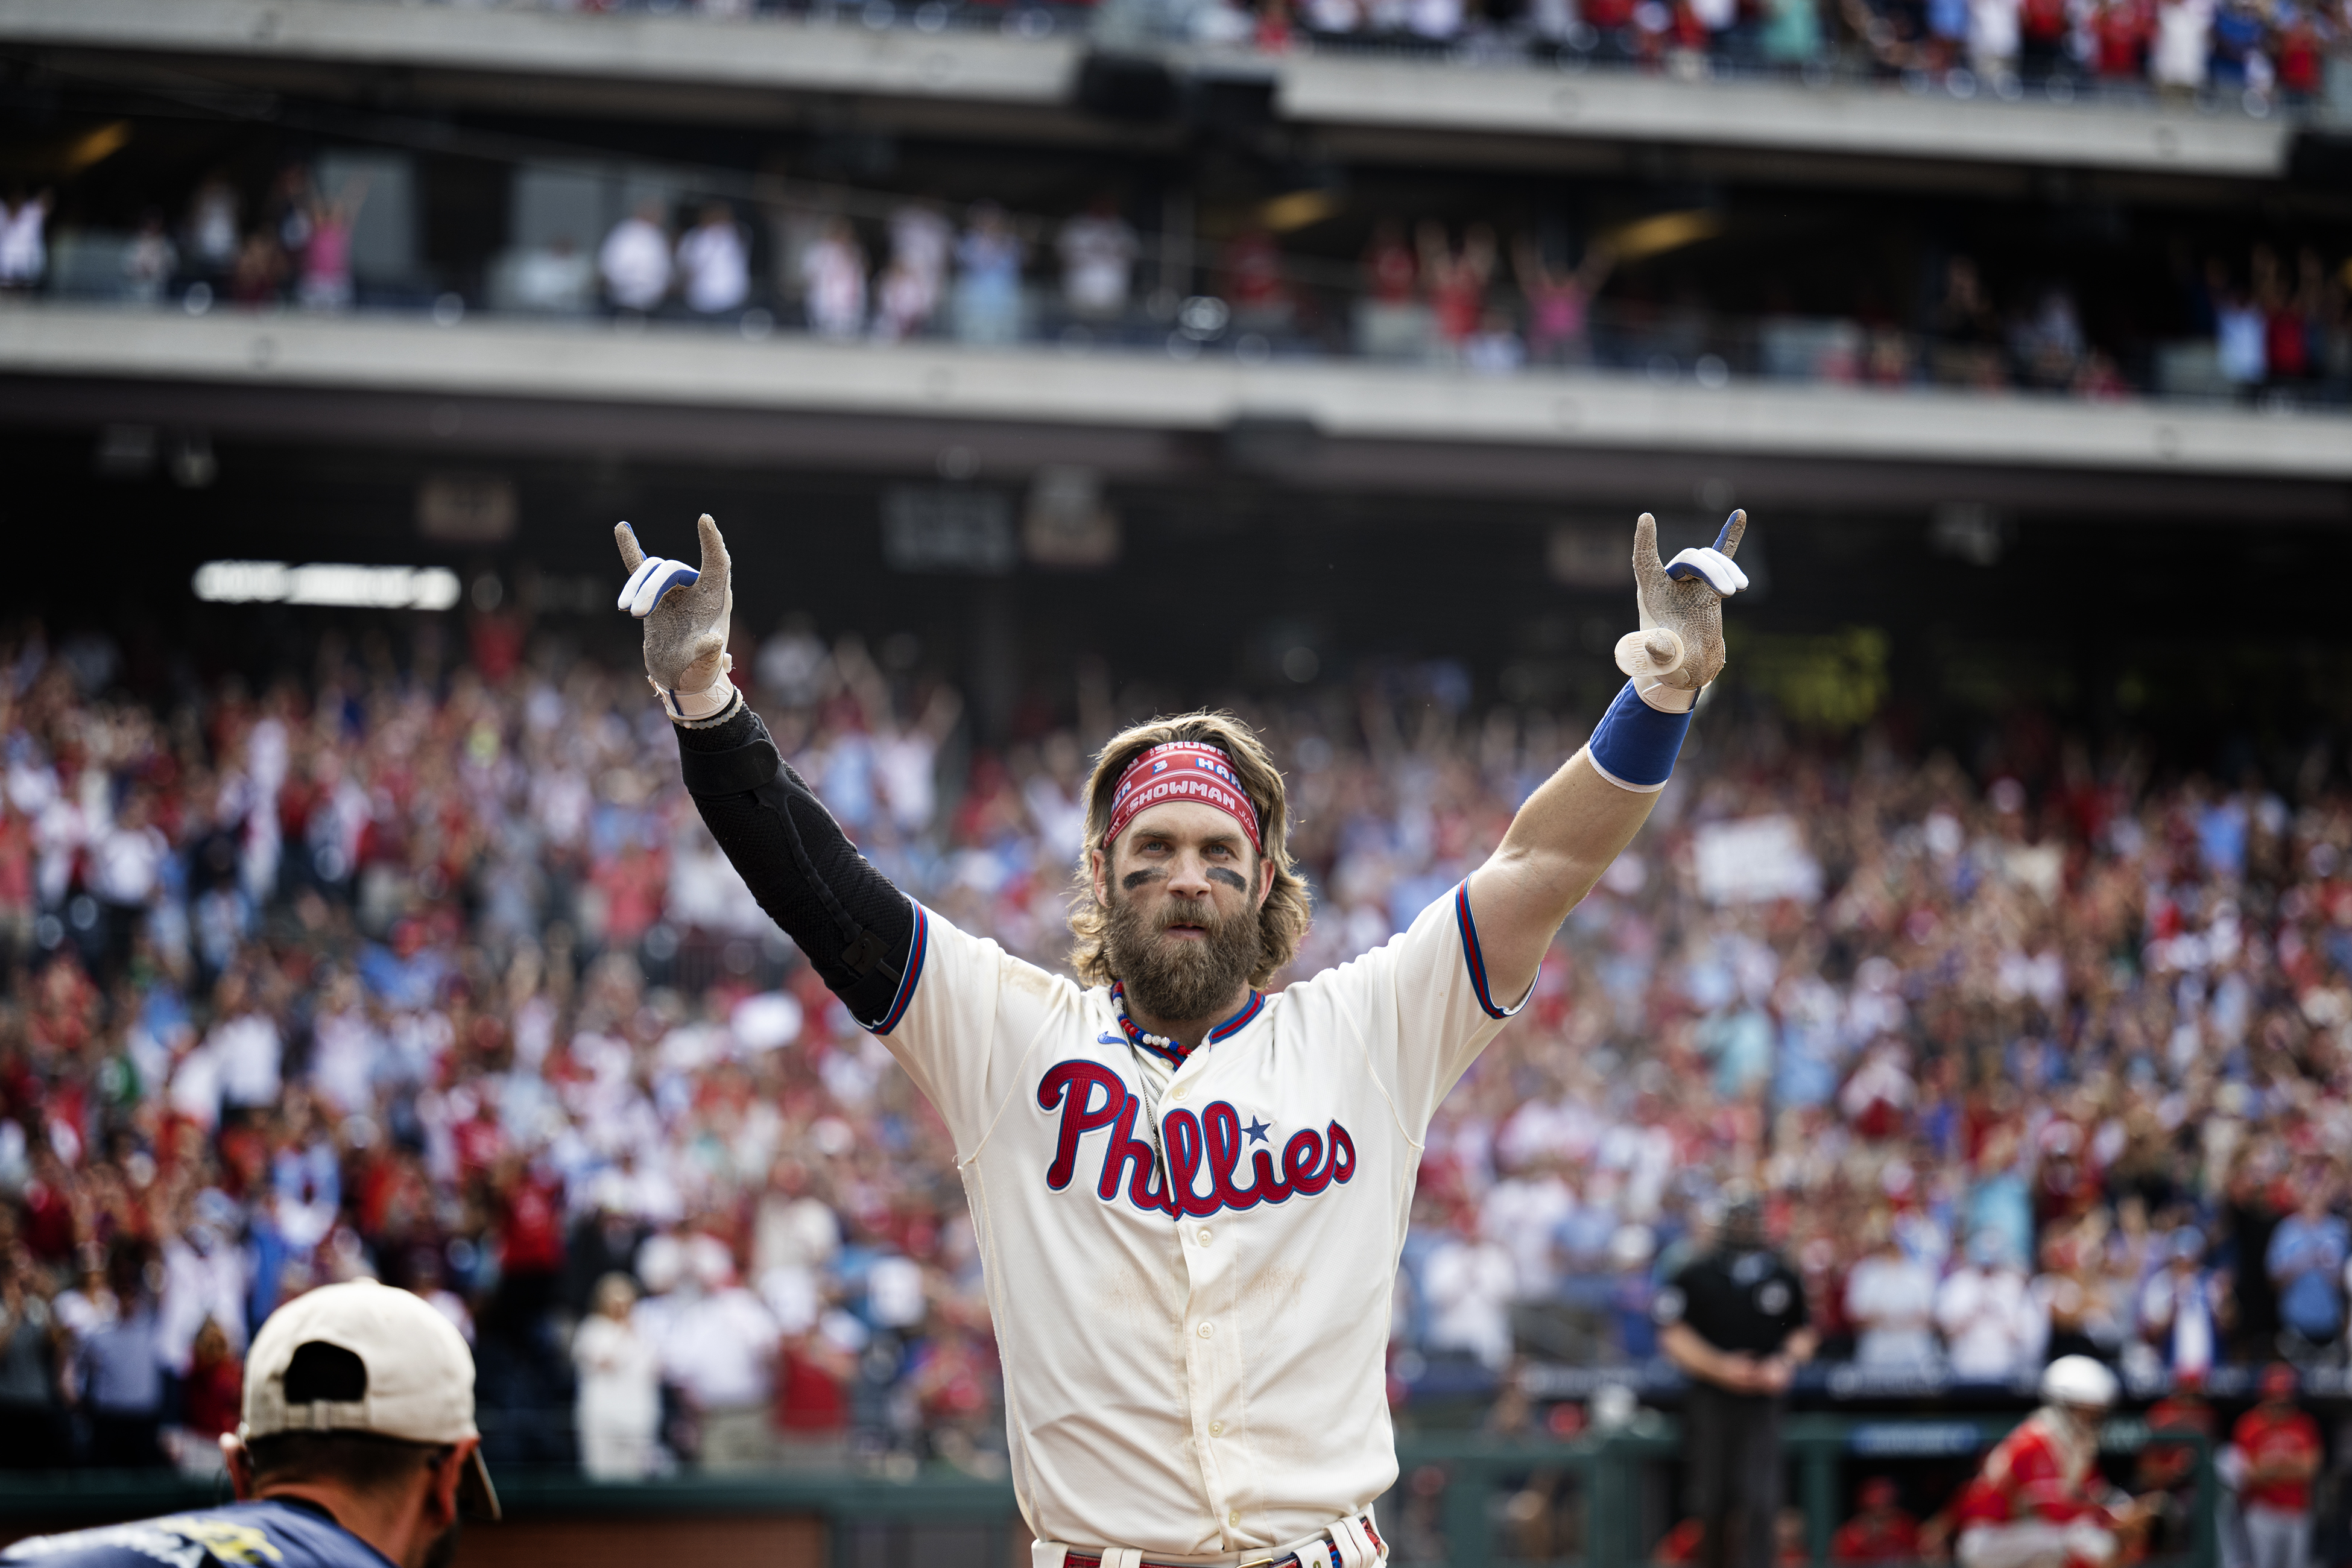 Bryce Harper is owning October for the Phillies